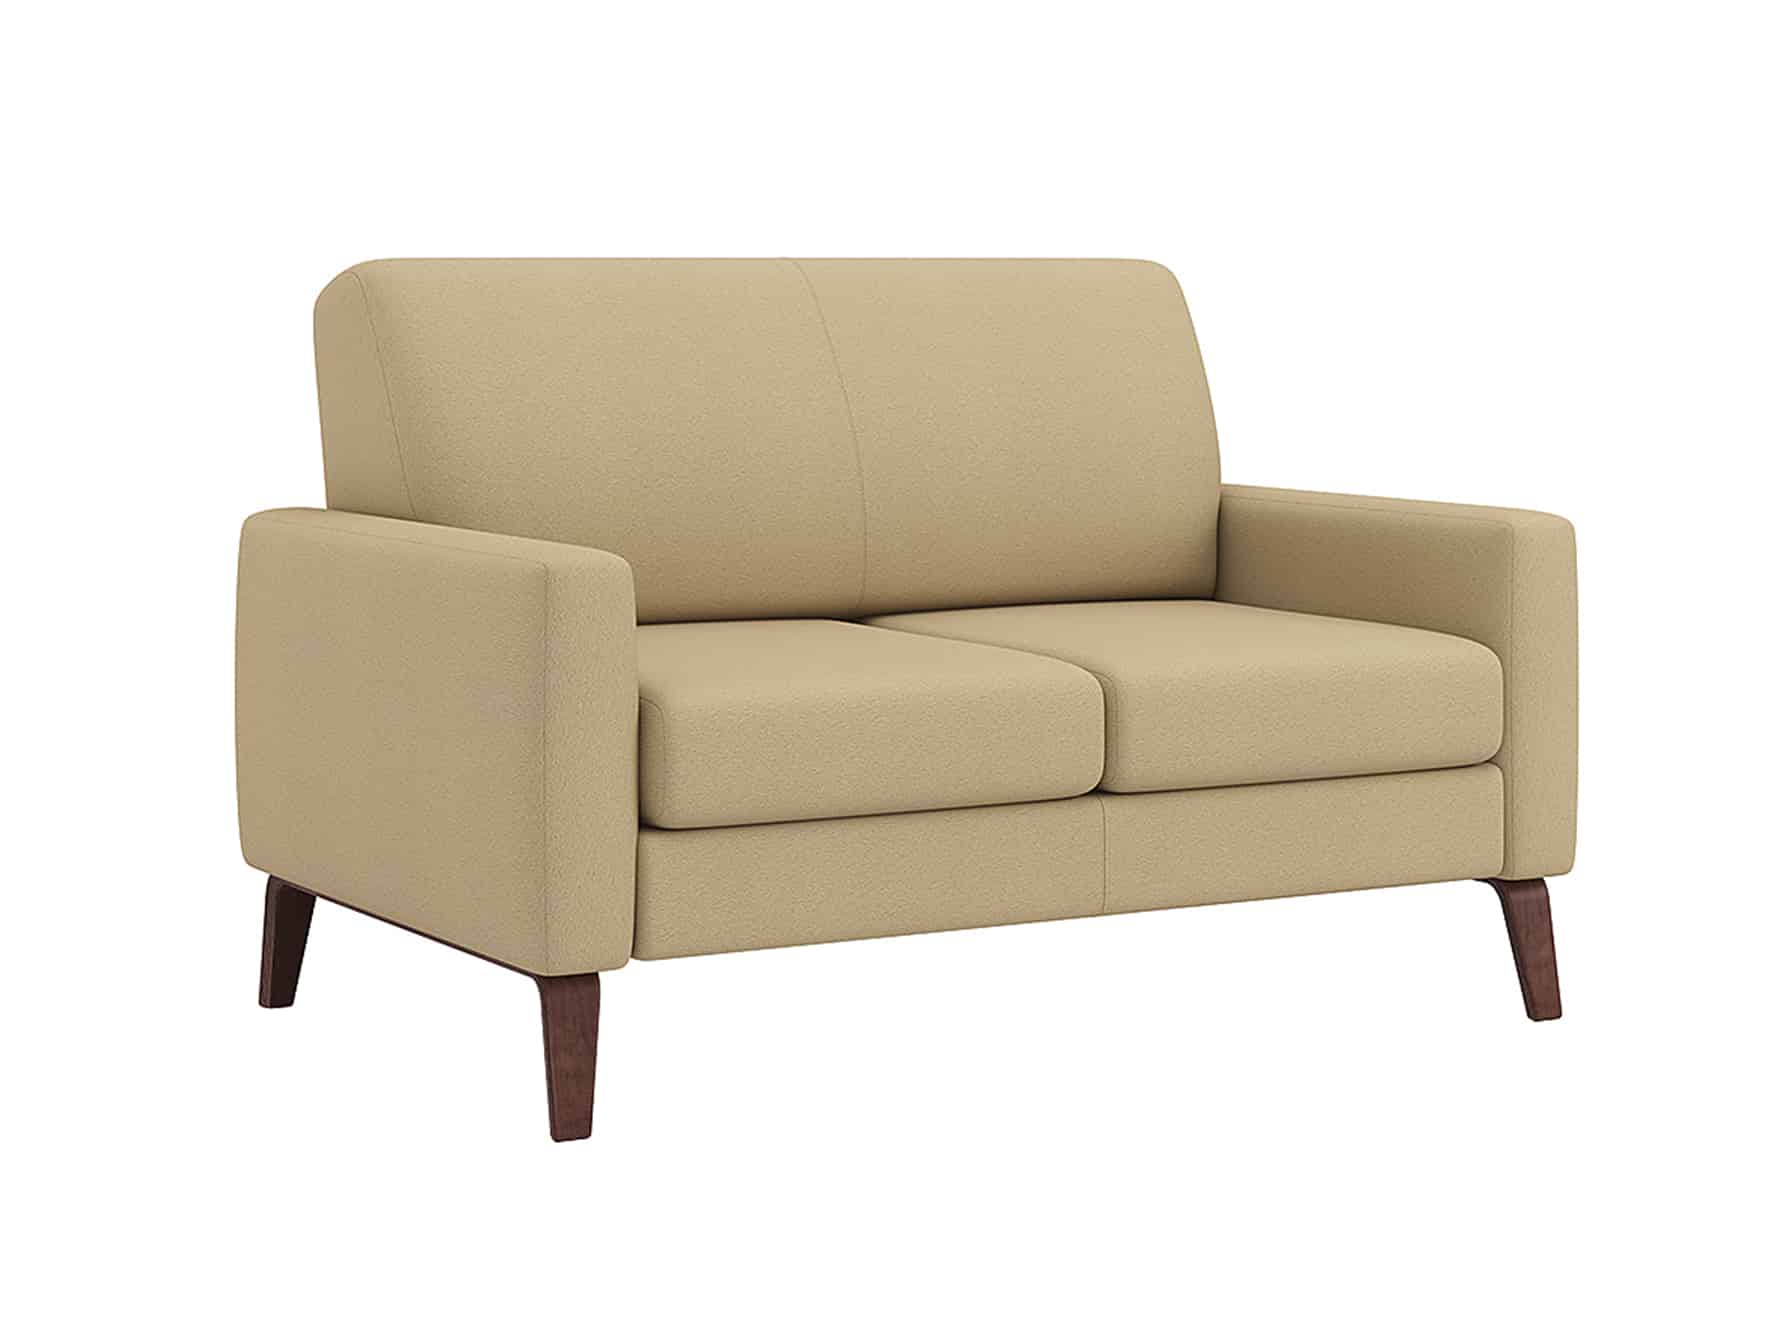 Chill Loveseat Campus Apartment Furniture for College Students